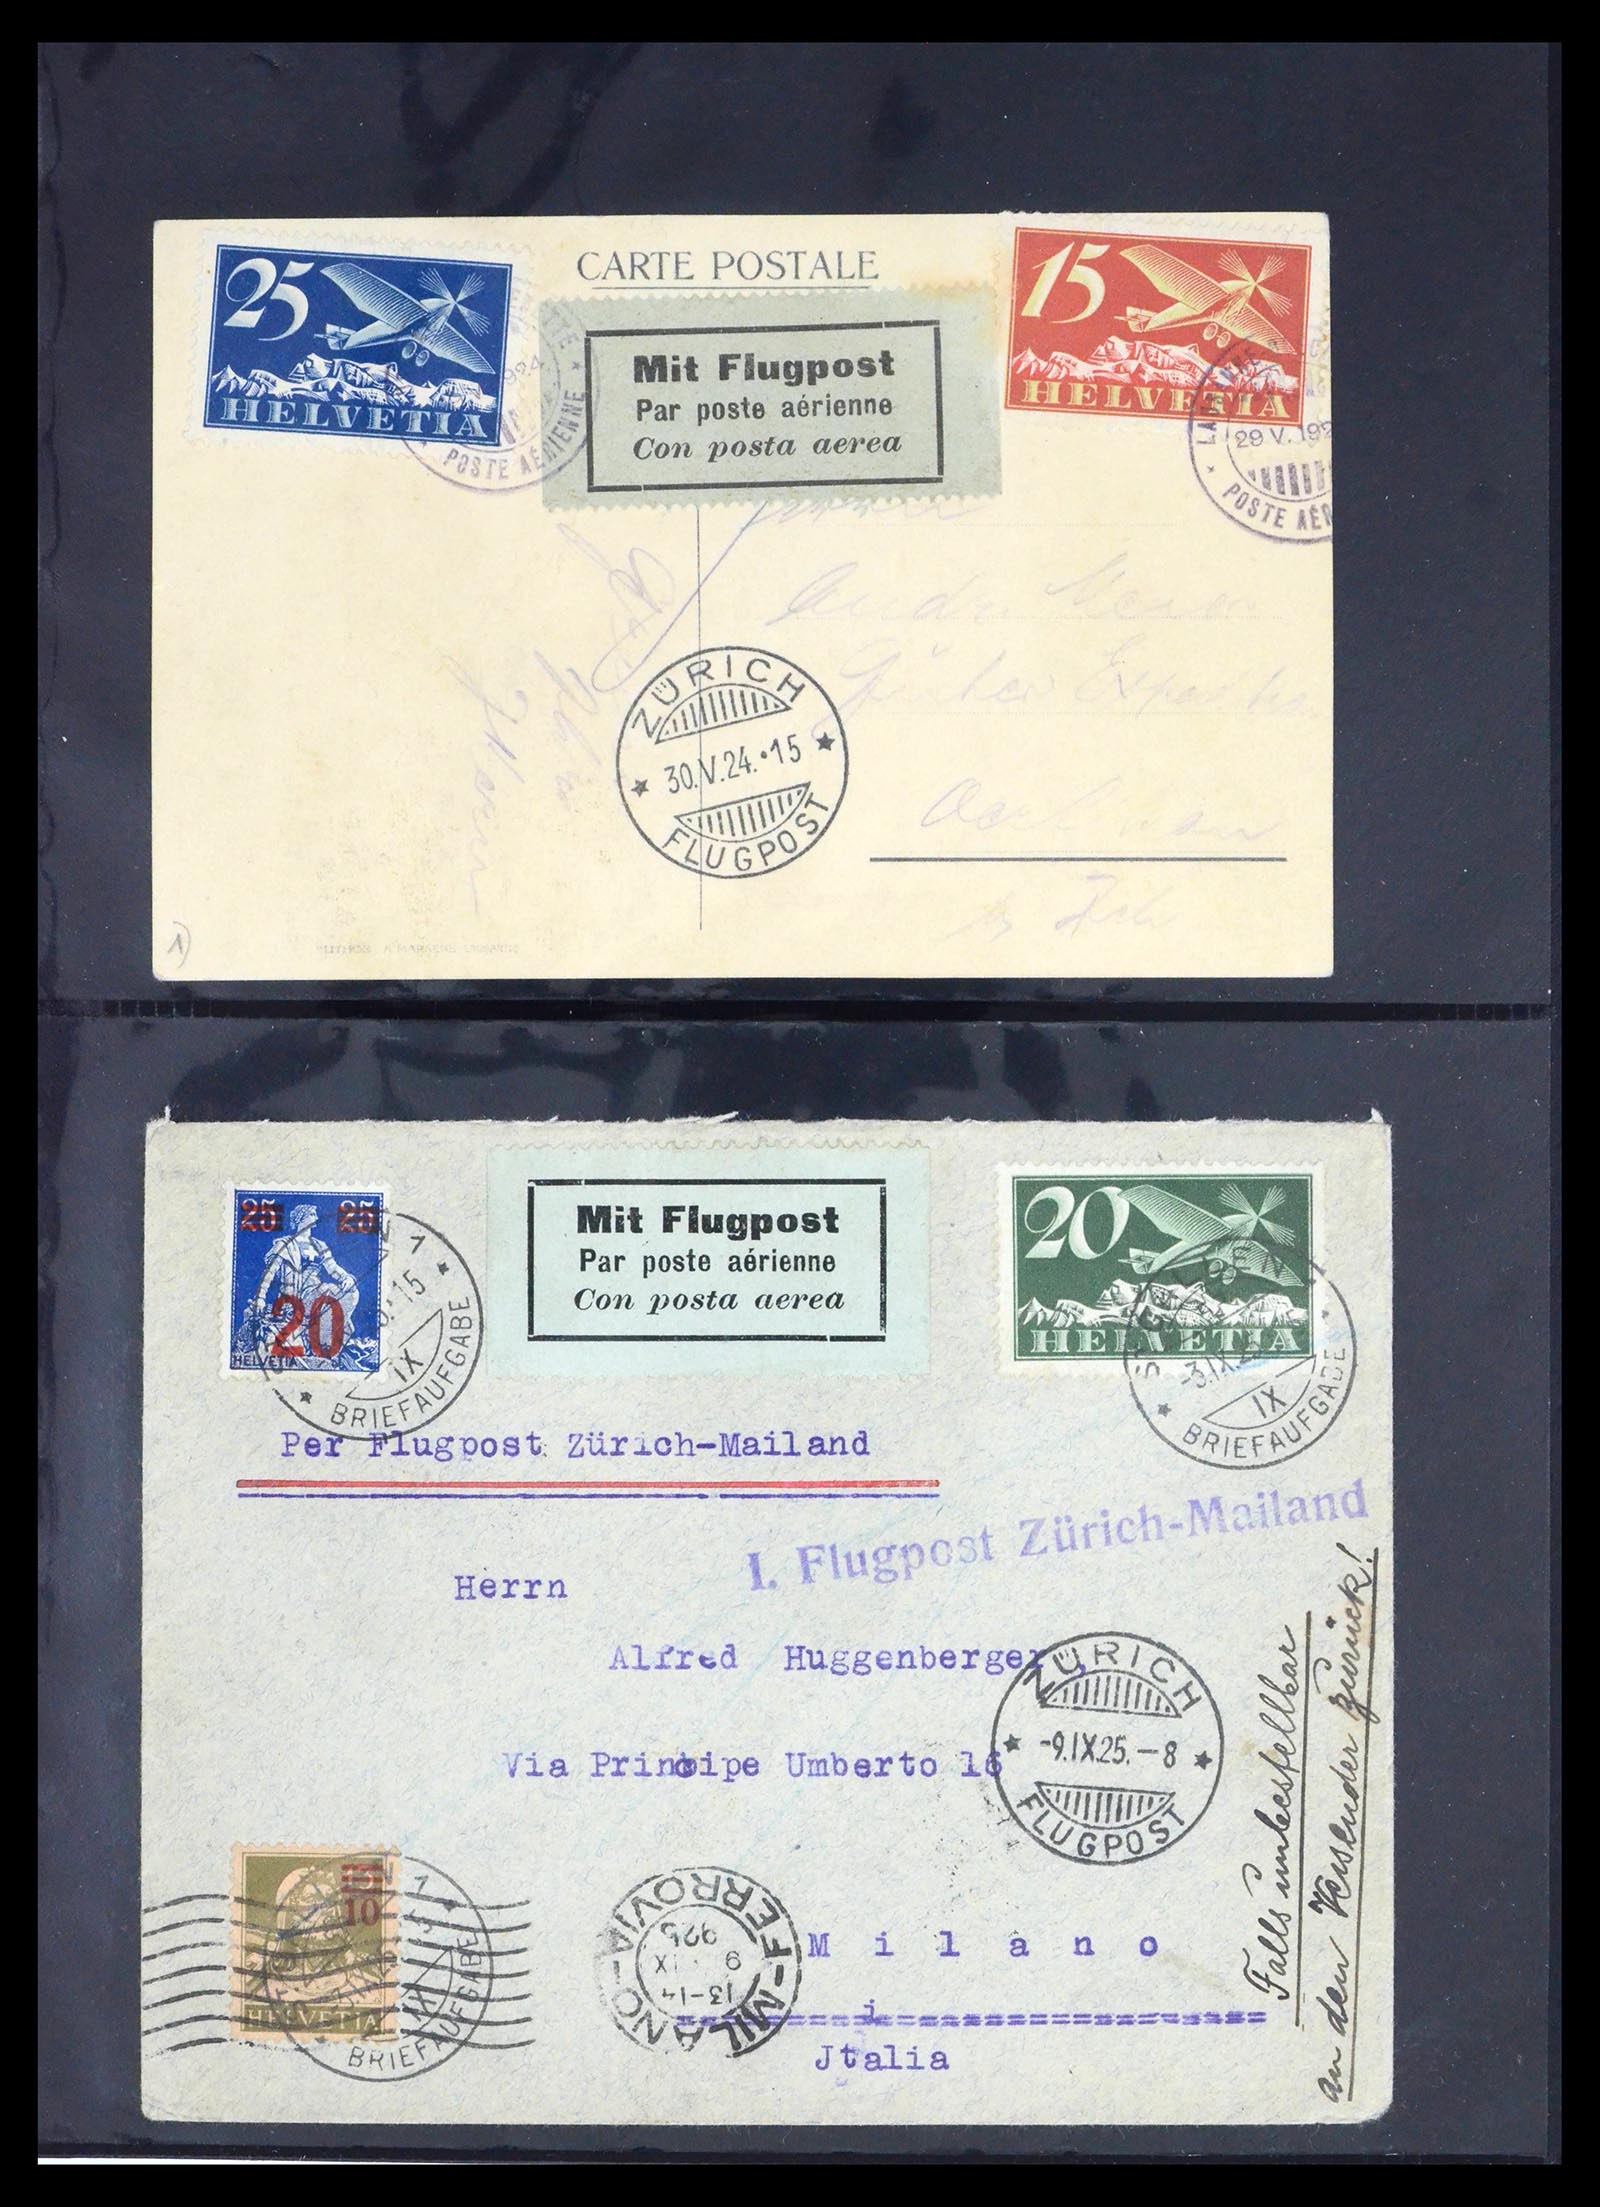 39533 0002 - Stamp collection 39533 Zwitserland airmail covers 1925-1960.